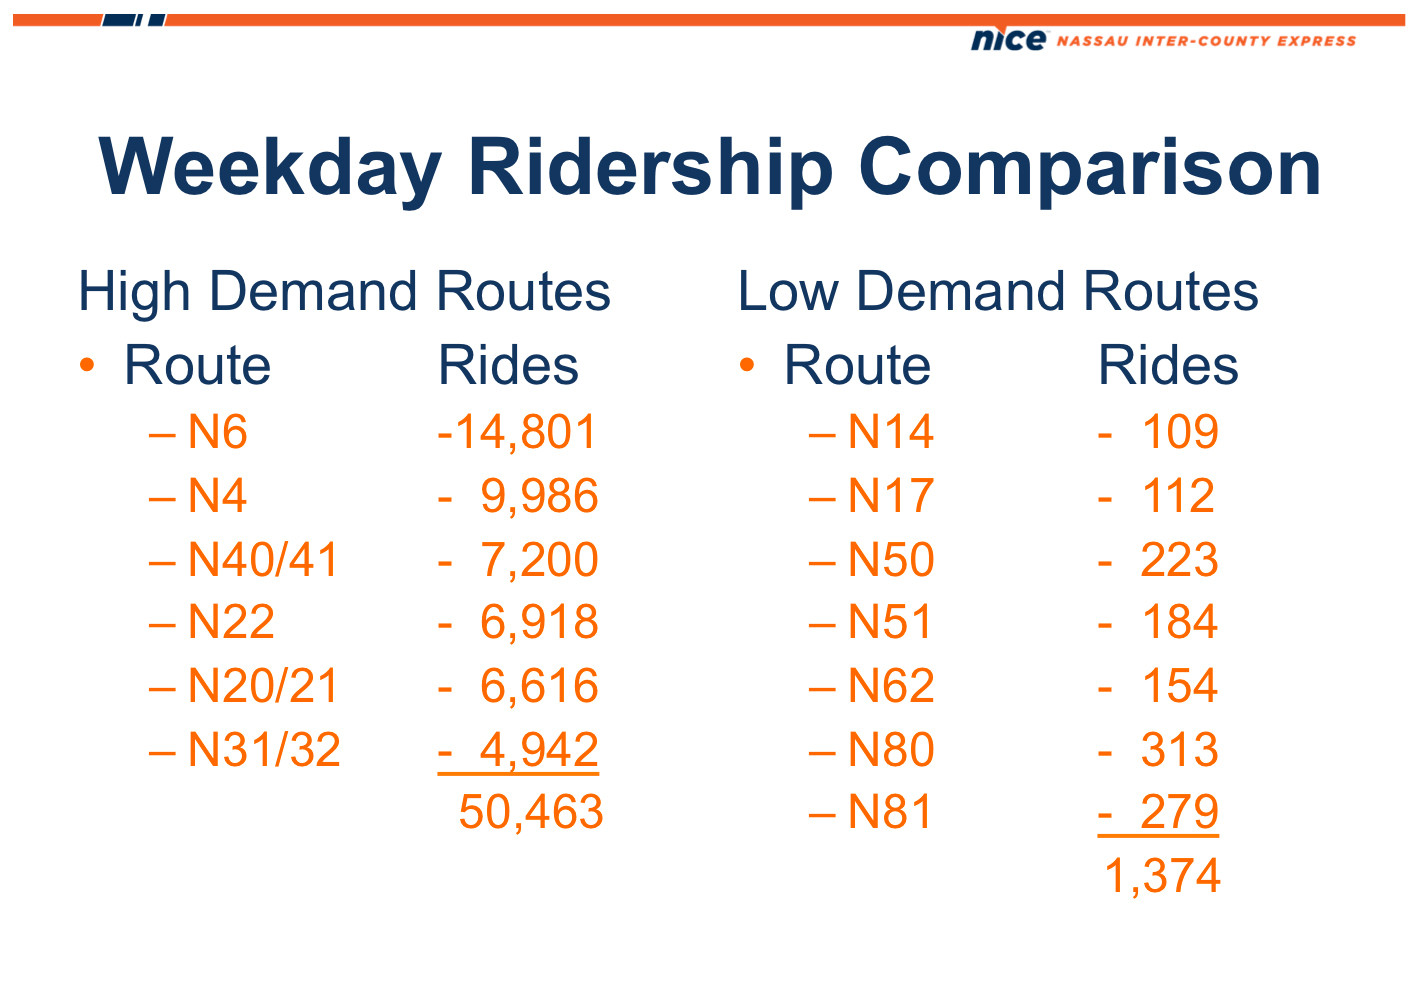 NICE, which is operated by Transdev, based its service reduction recommendations to the Nassau County Bus Transit Committee on ridership data.